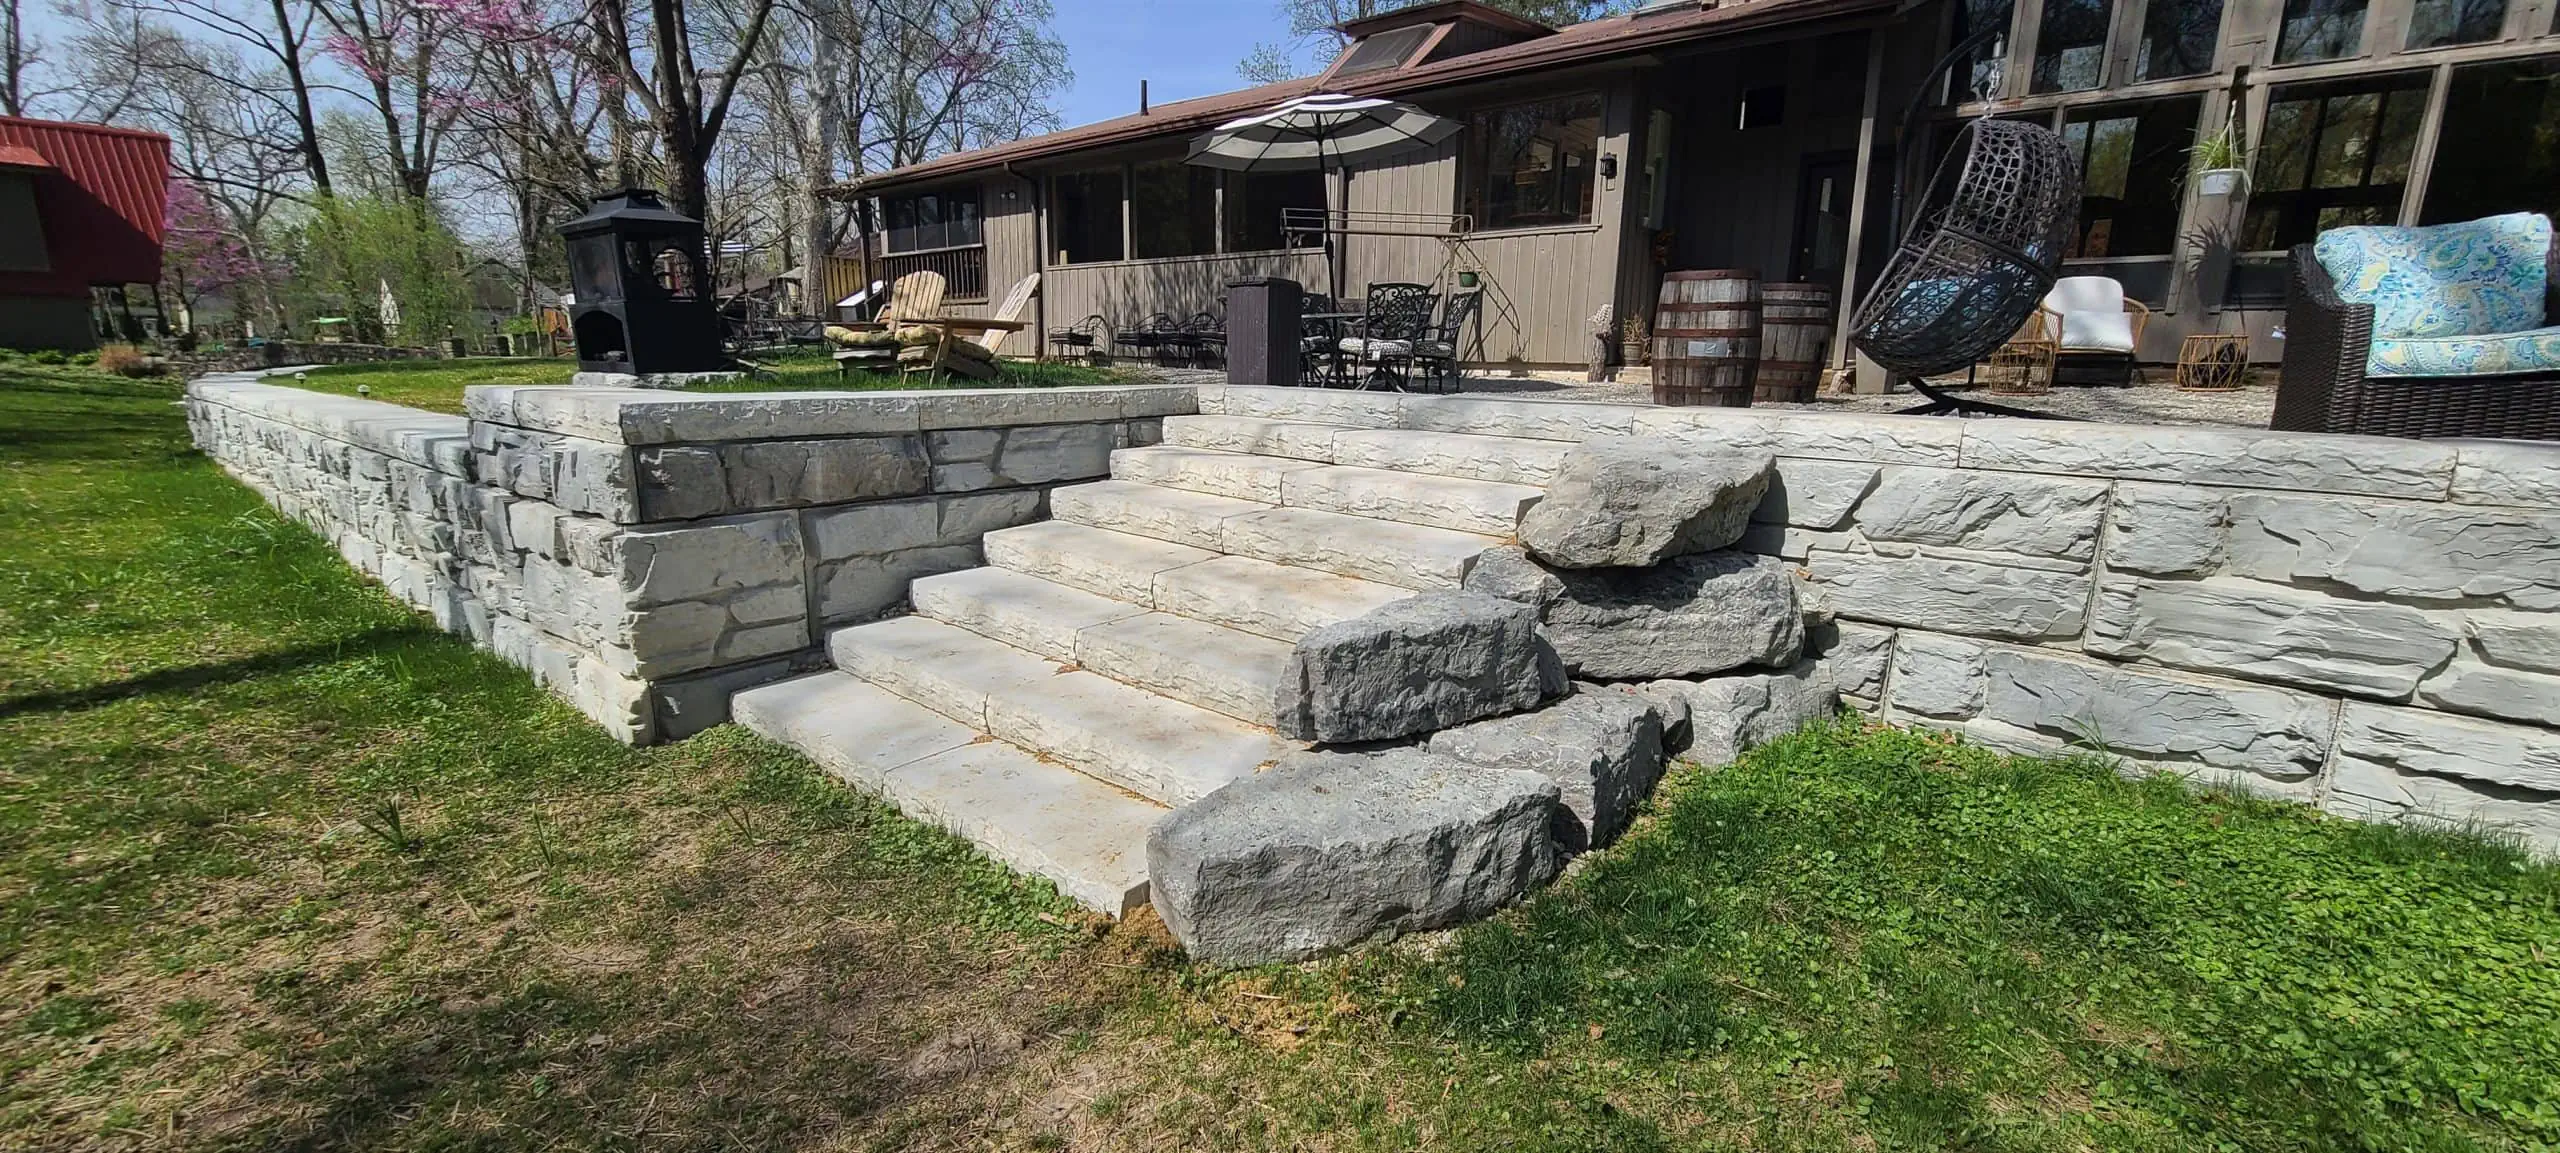 MagnumStone retaining wall with cap unit steps.